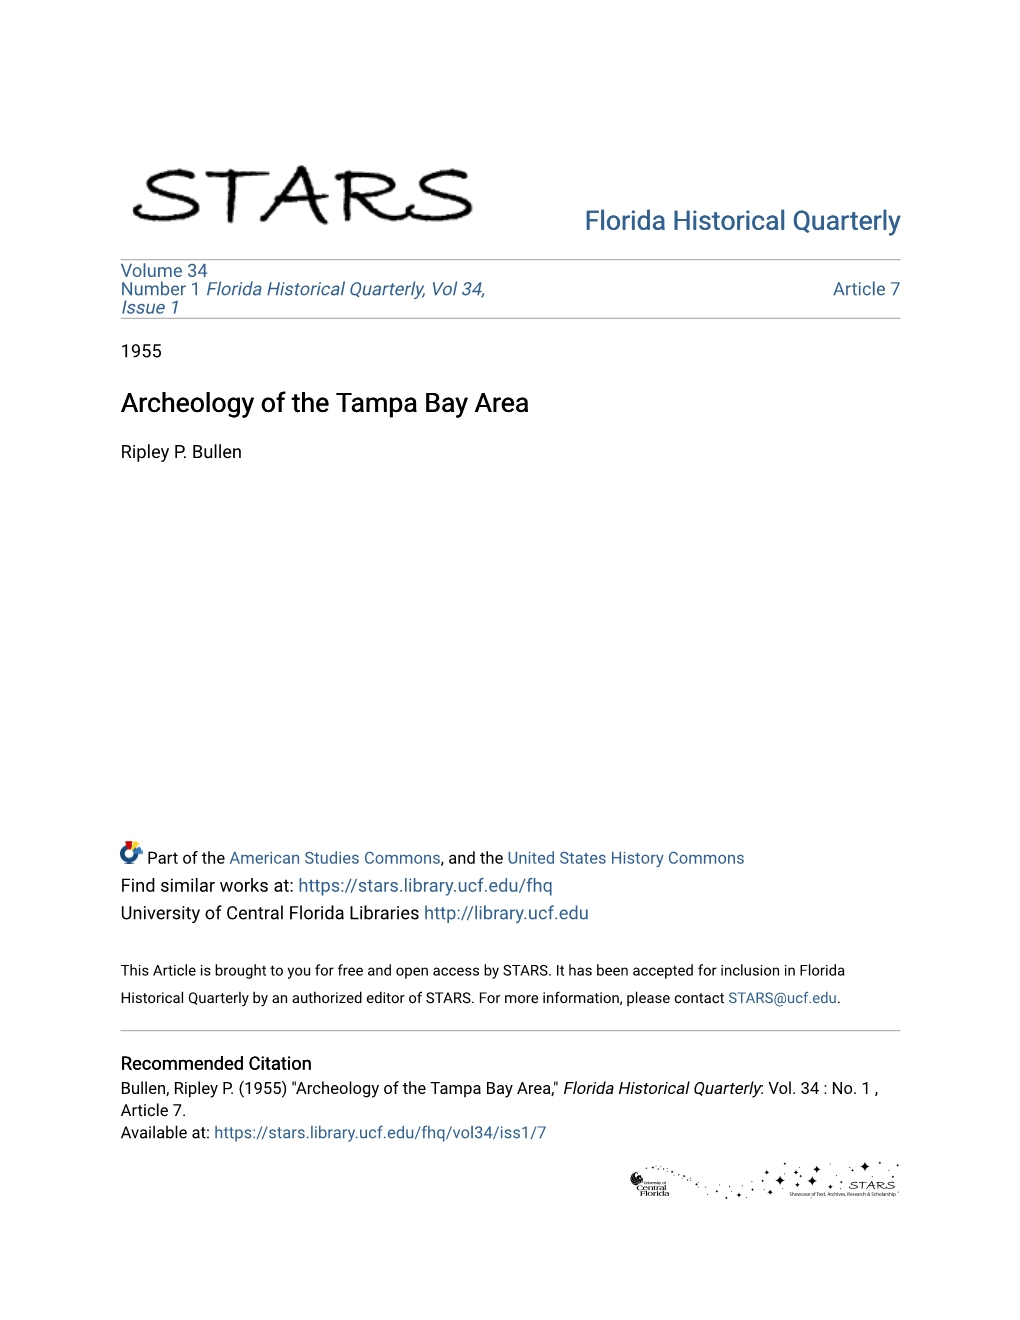 Archeology of the Tampa Bay Area